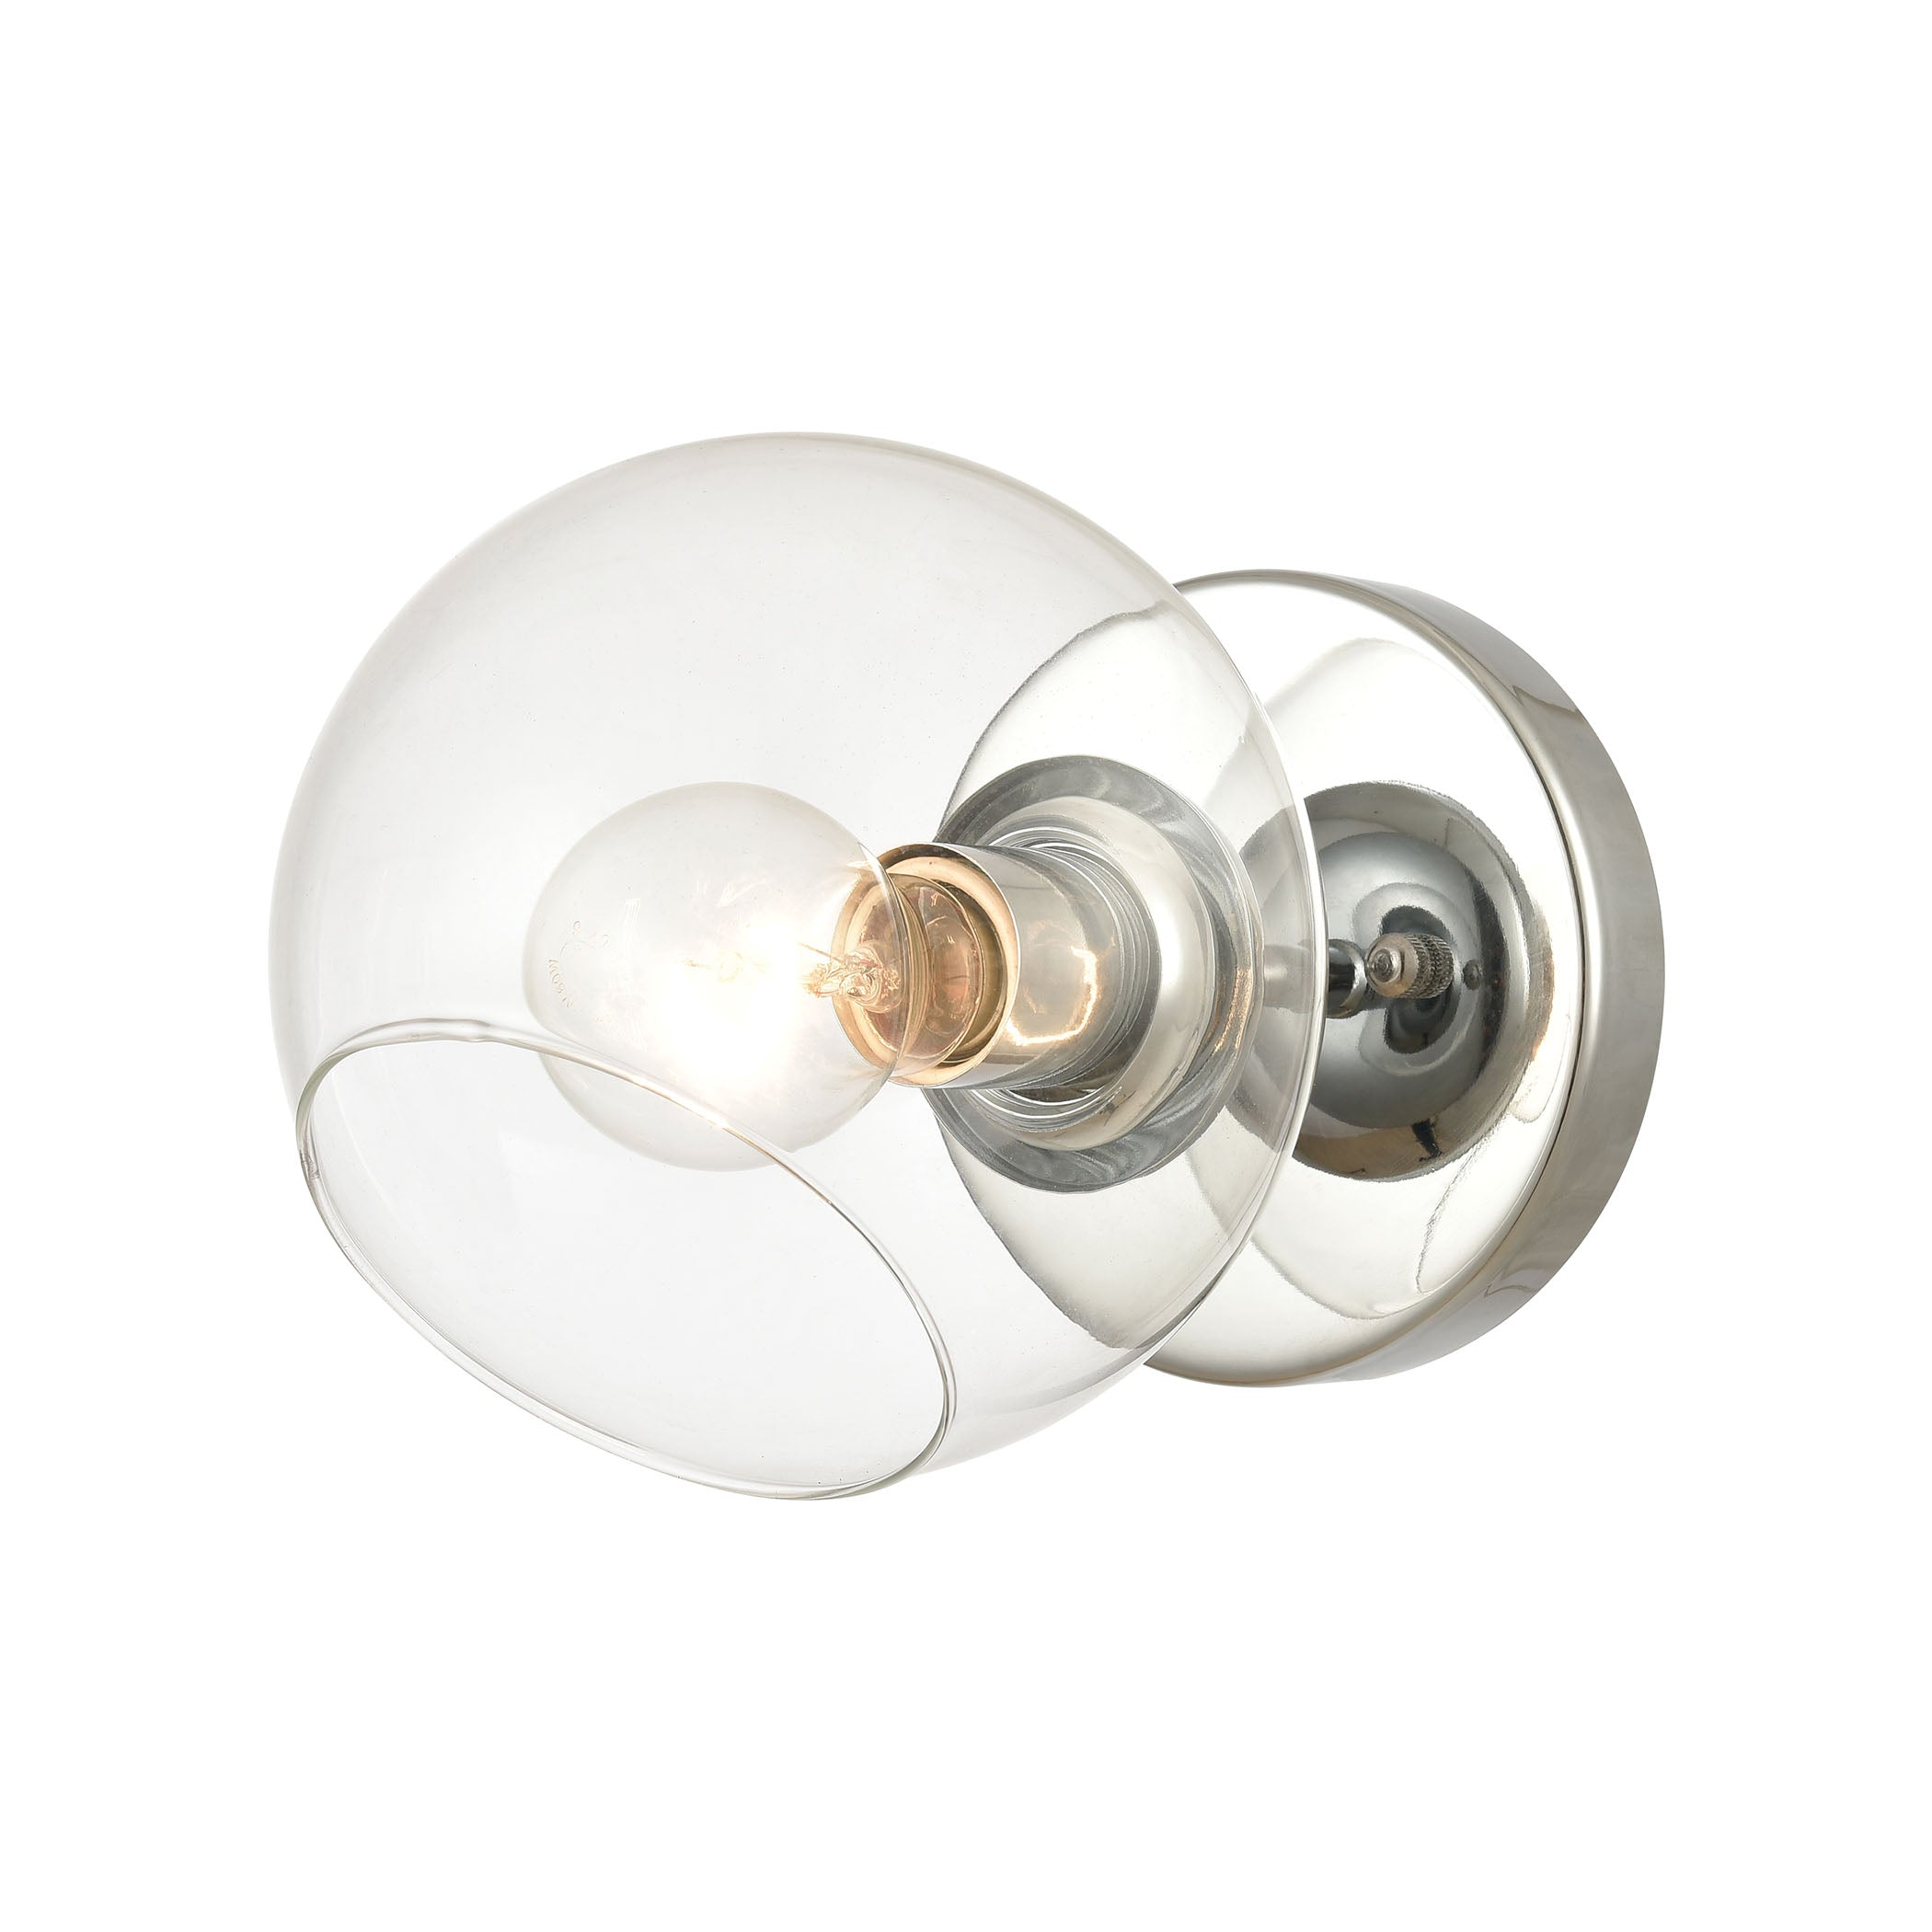 ELK Lighting 18373/1 Claro 1-Light Vanity Light in Polished Chrome with Clear Glass